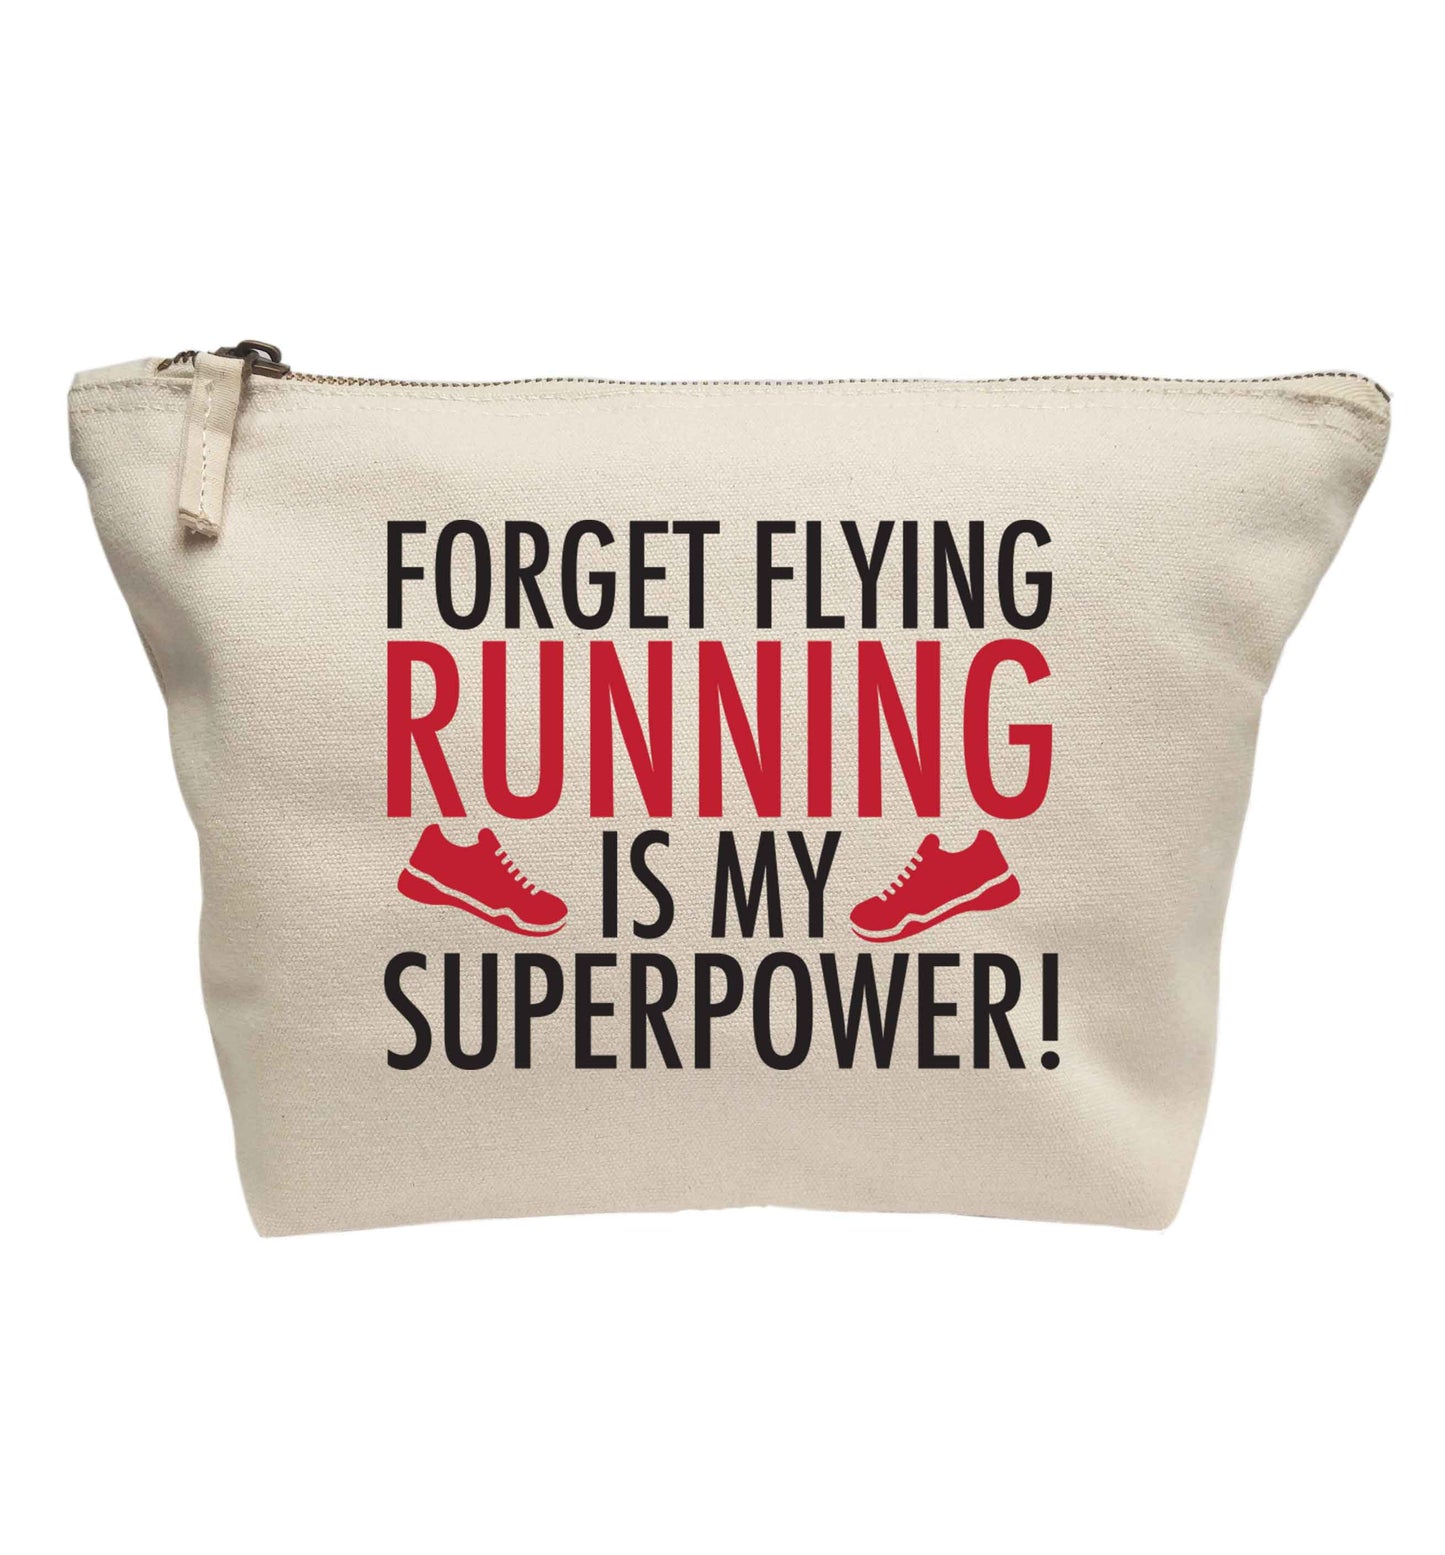 Forget flying running is my superpower | Makeup / wash bag